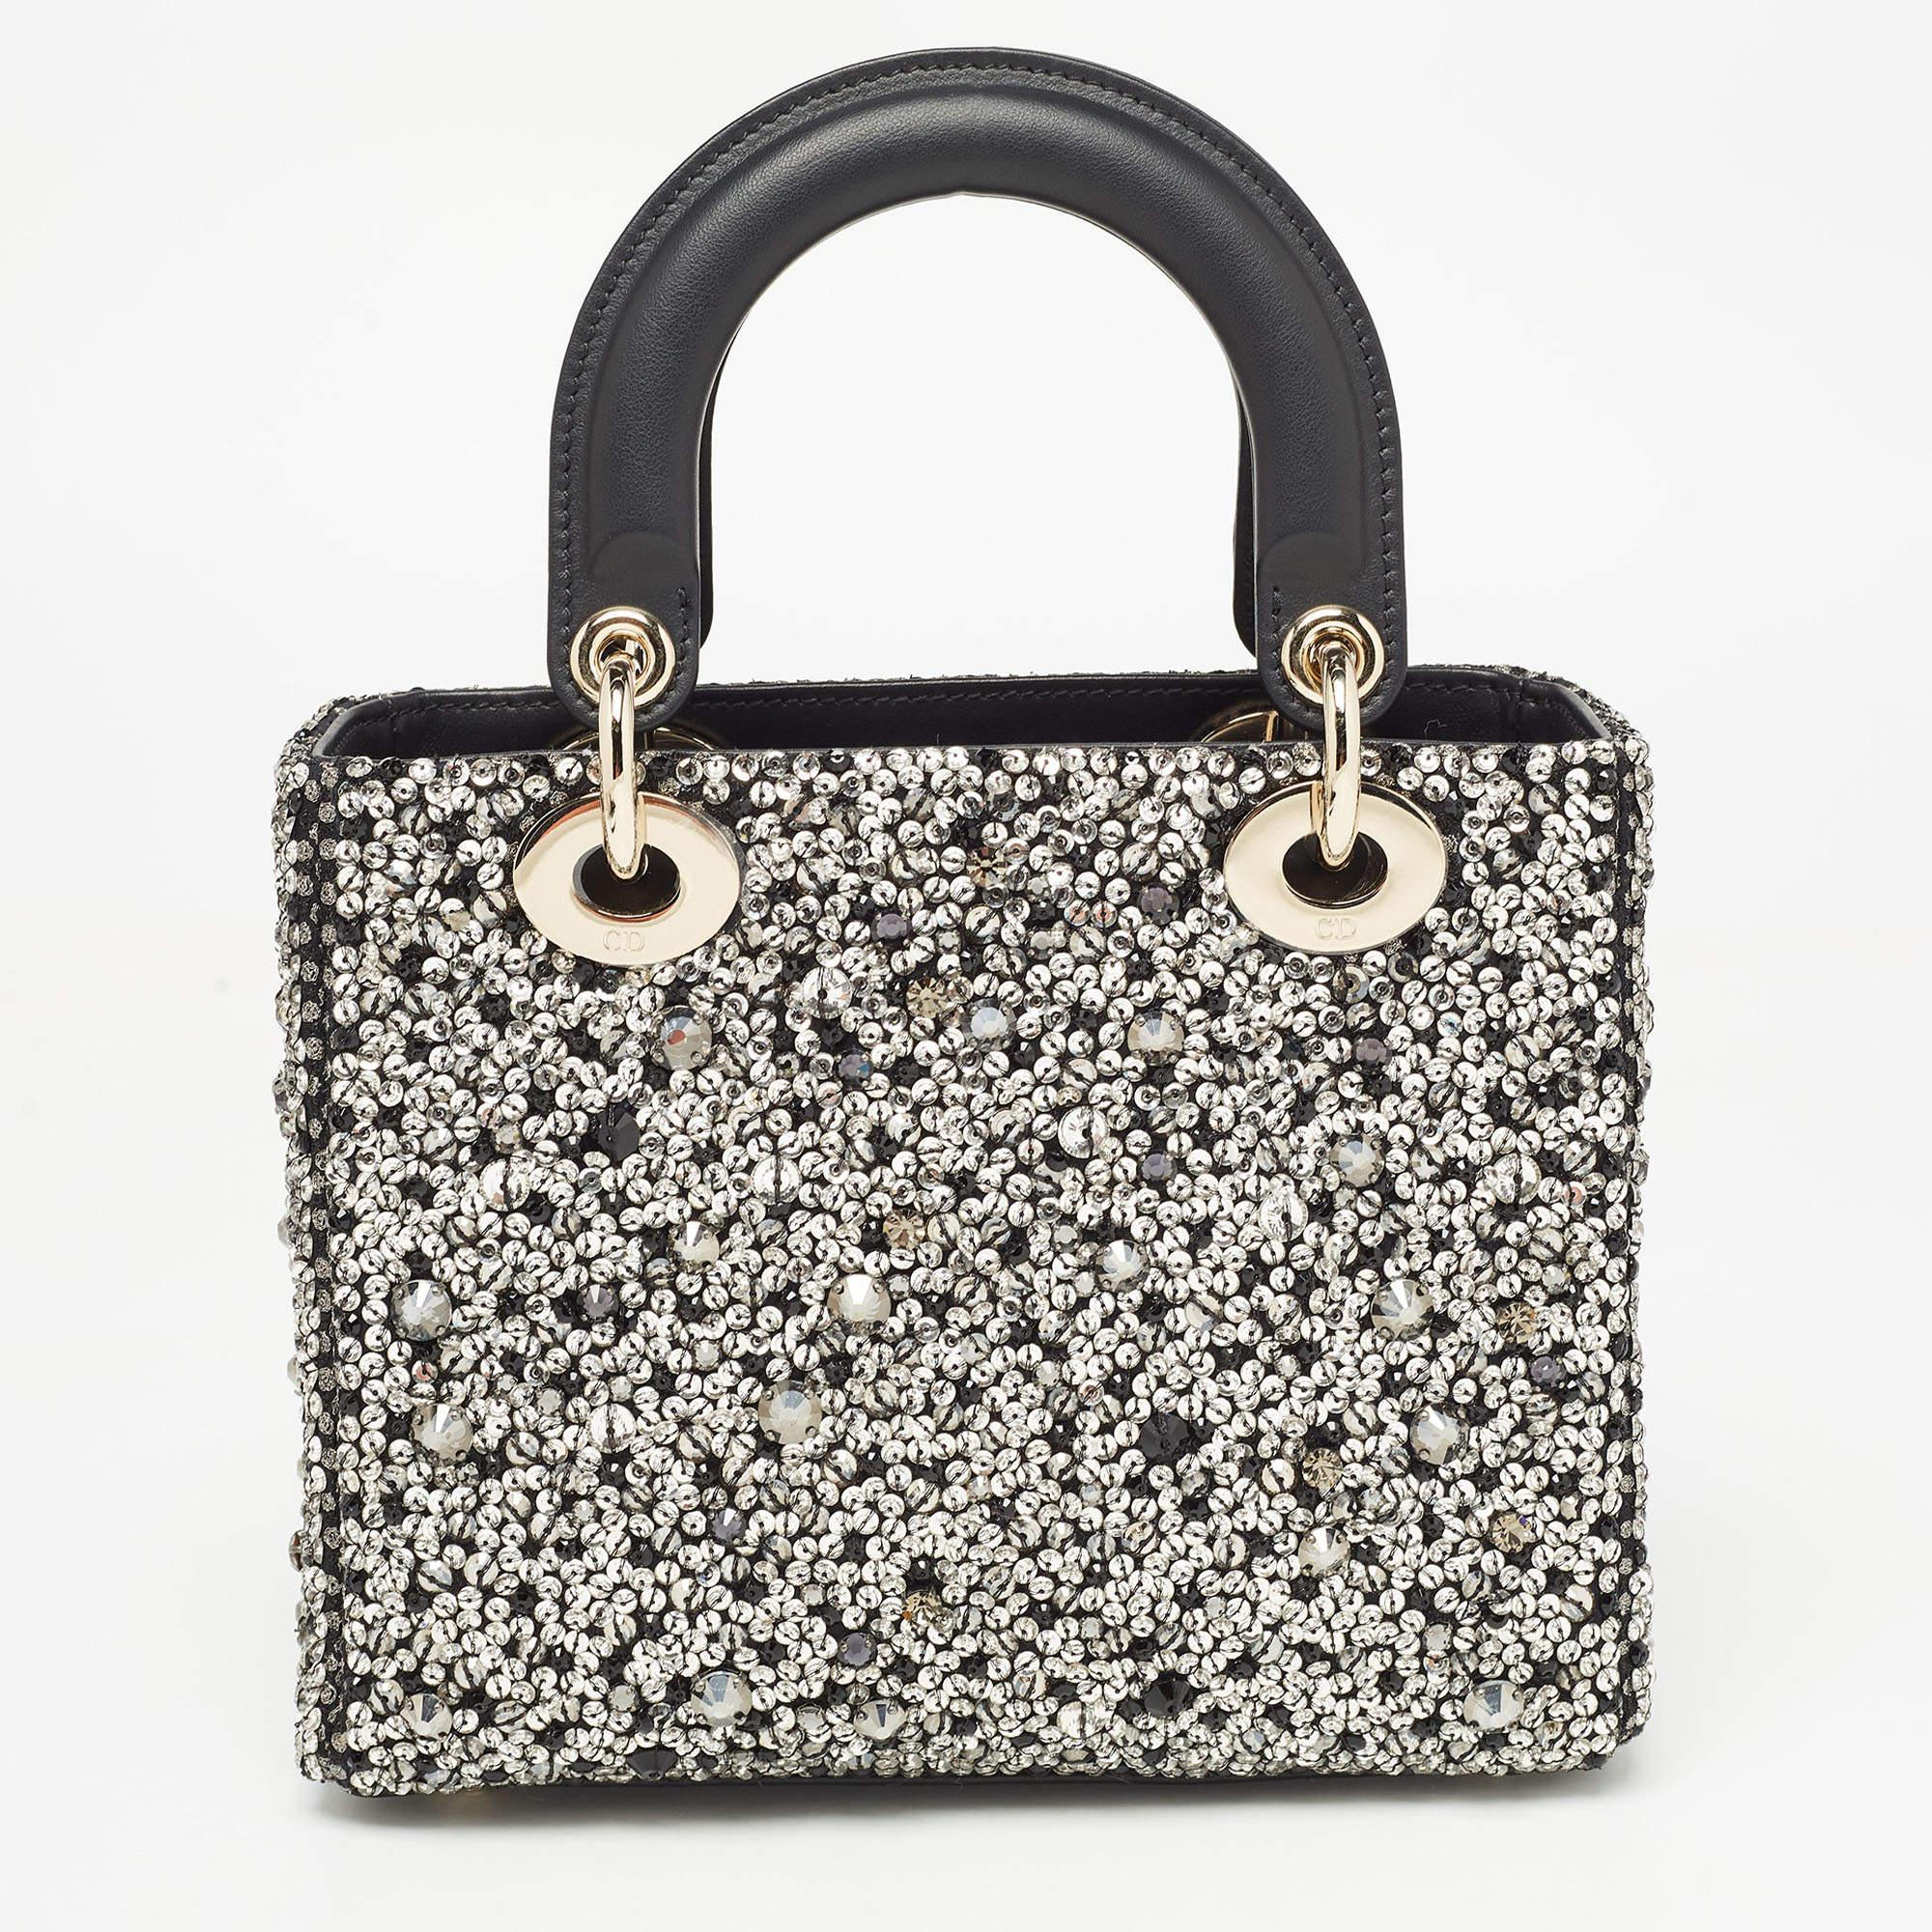 The Lady Dior Tote exudes timeless elegance. Crafted from luxurious black leather, it features intricate sequin and crystal embellishments, creating a dazzling yet sophisticated aesthetic. The small size adds a touch of refinement to any ensemble,